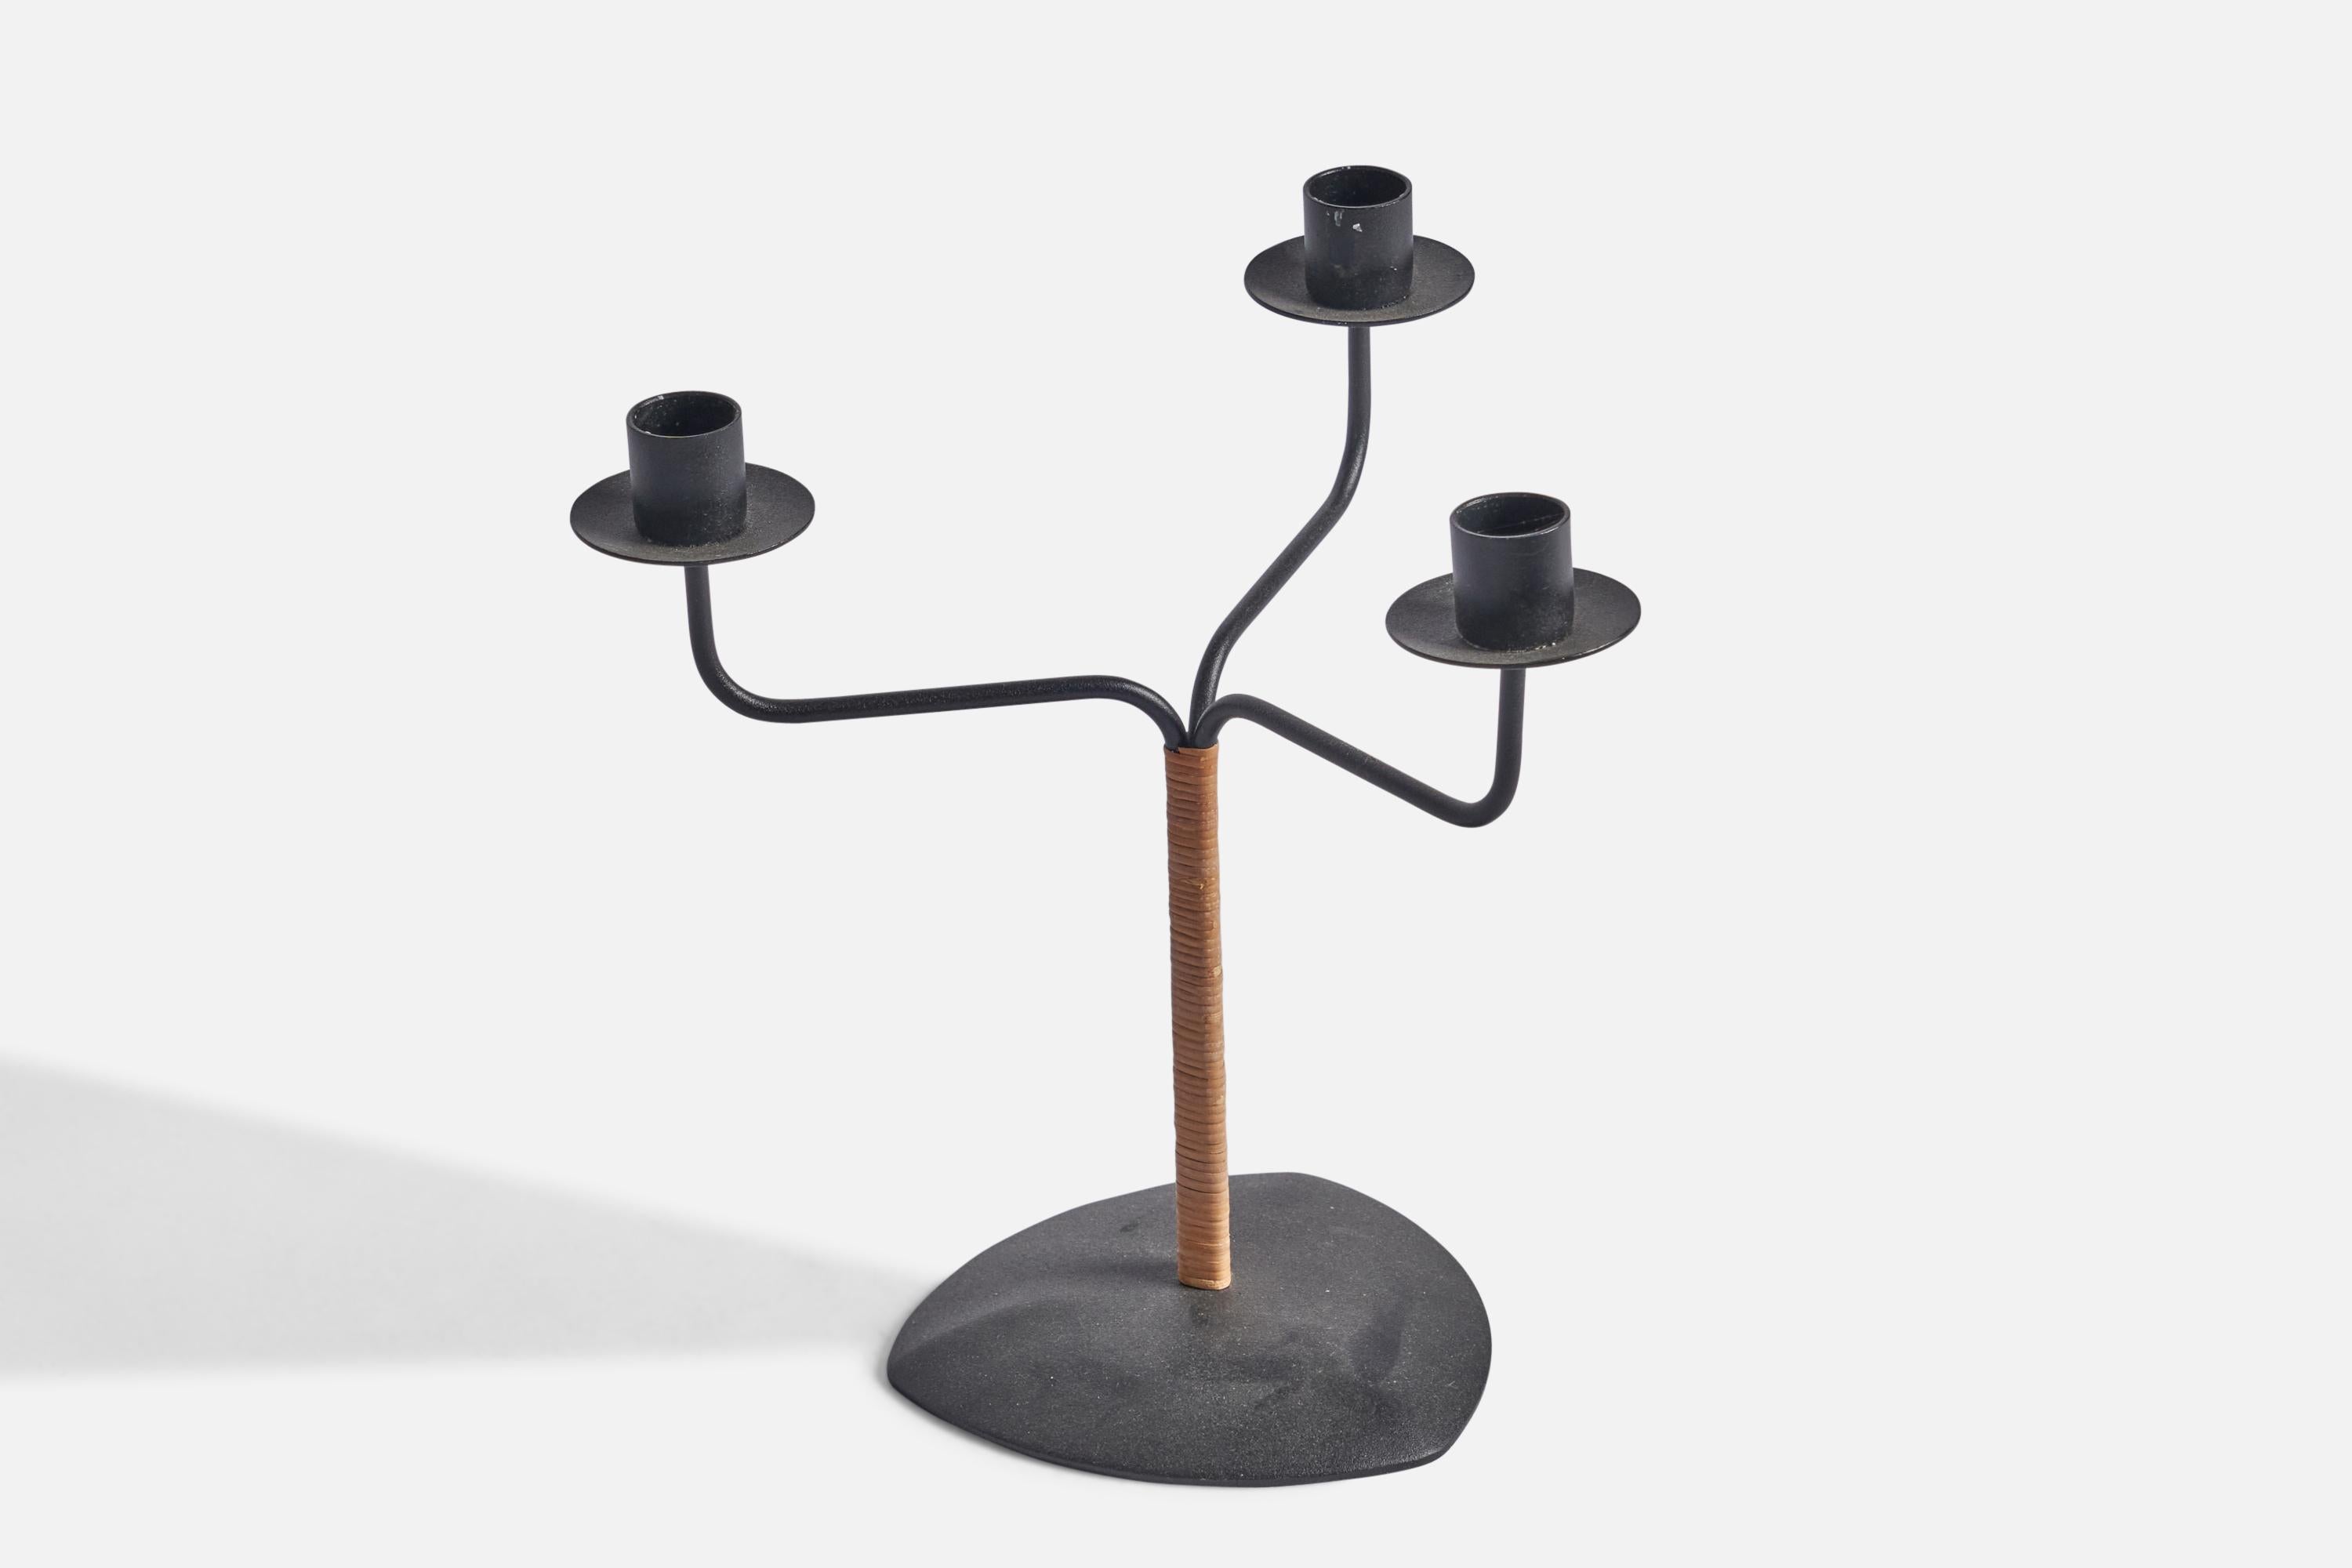 A black-lacquered metal and rattan candelabra designed and produced by Laurids Lønborg, Denmark, 1950s.

Holds 0.75” candles